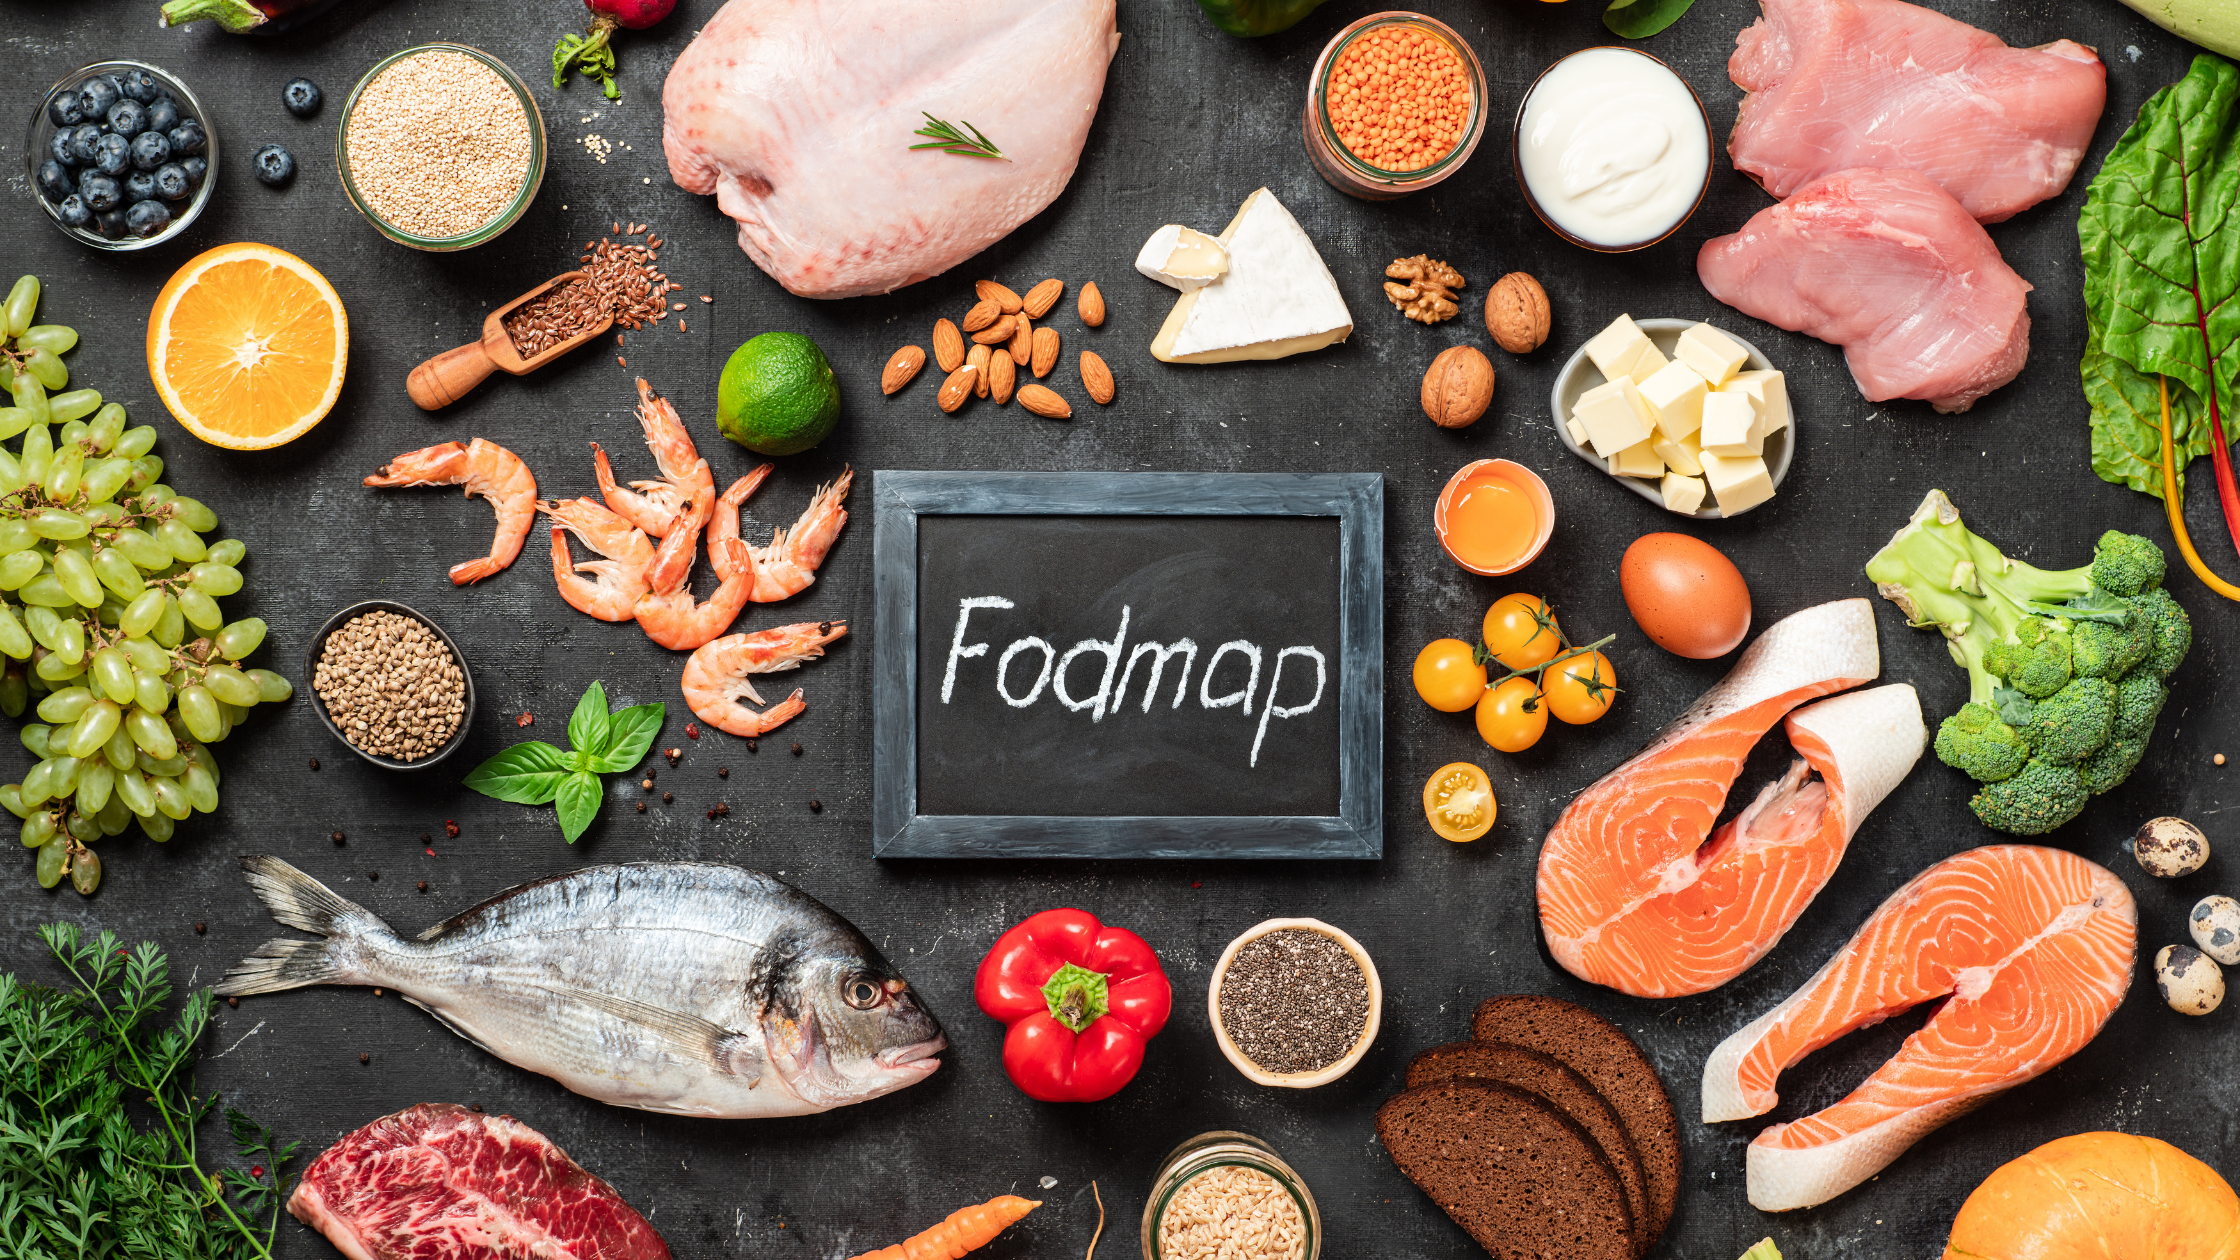 The word "Fodmap" written in chalk on a slate board surrounded by various healthy-looking foods, sliced oranges, cherry tomatoes, shrimp, salmon, broccoli, cheese, nuts, herbs